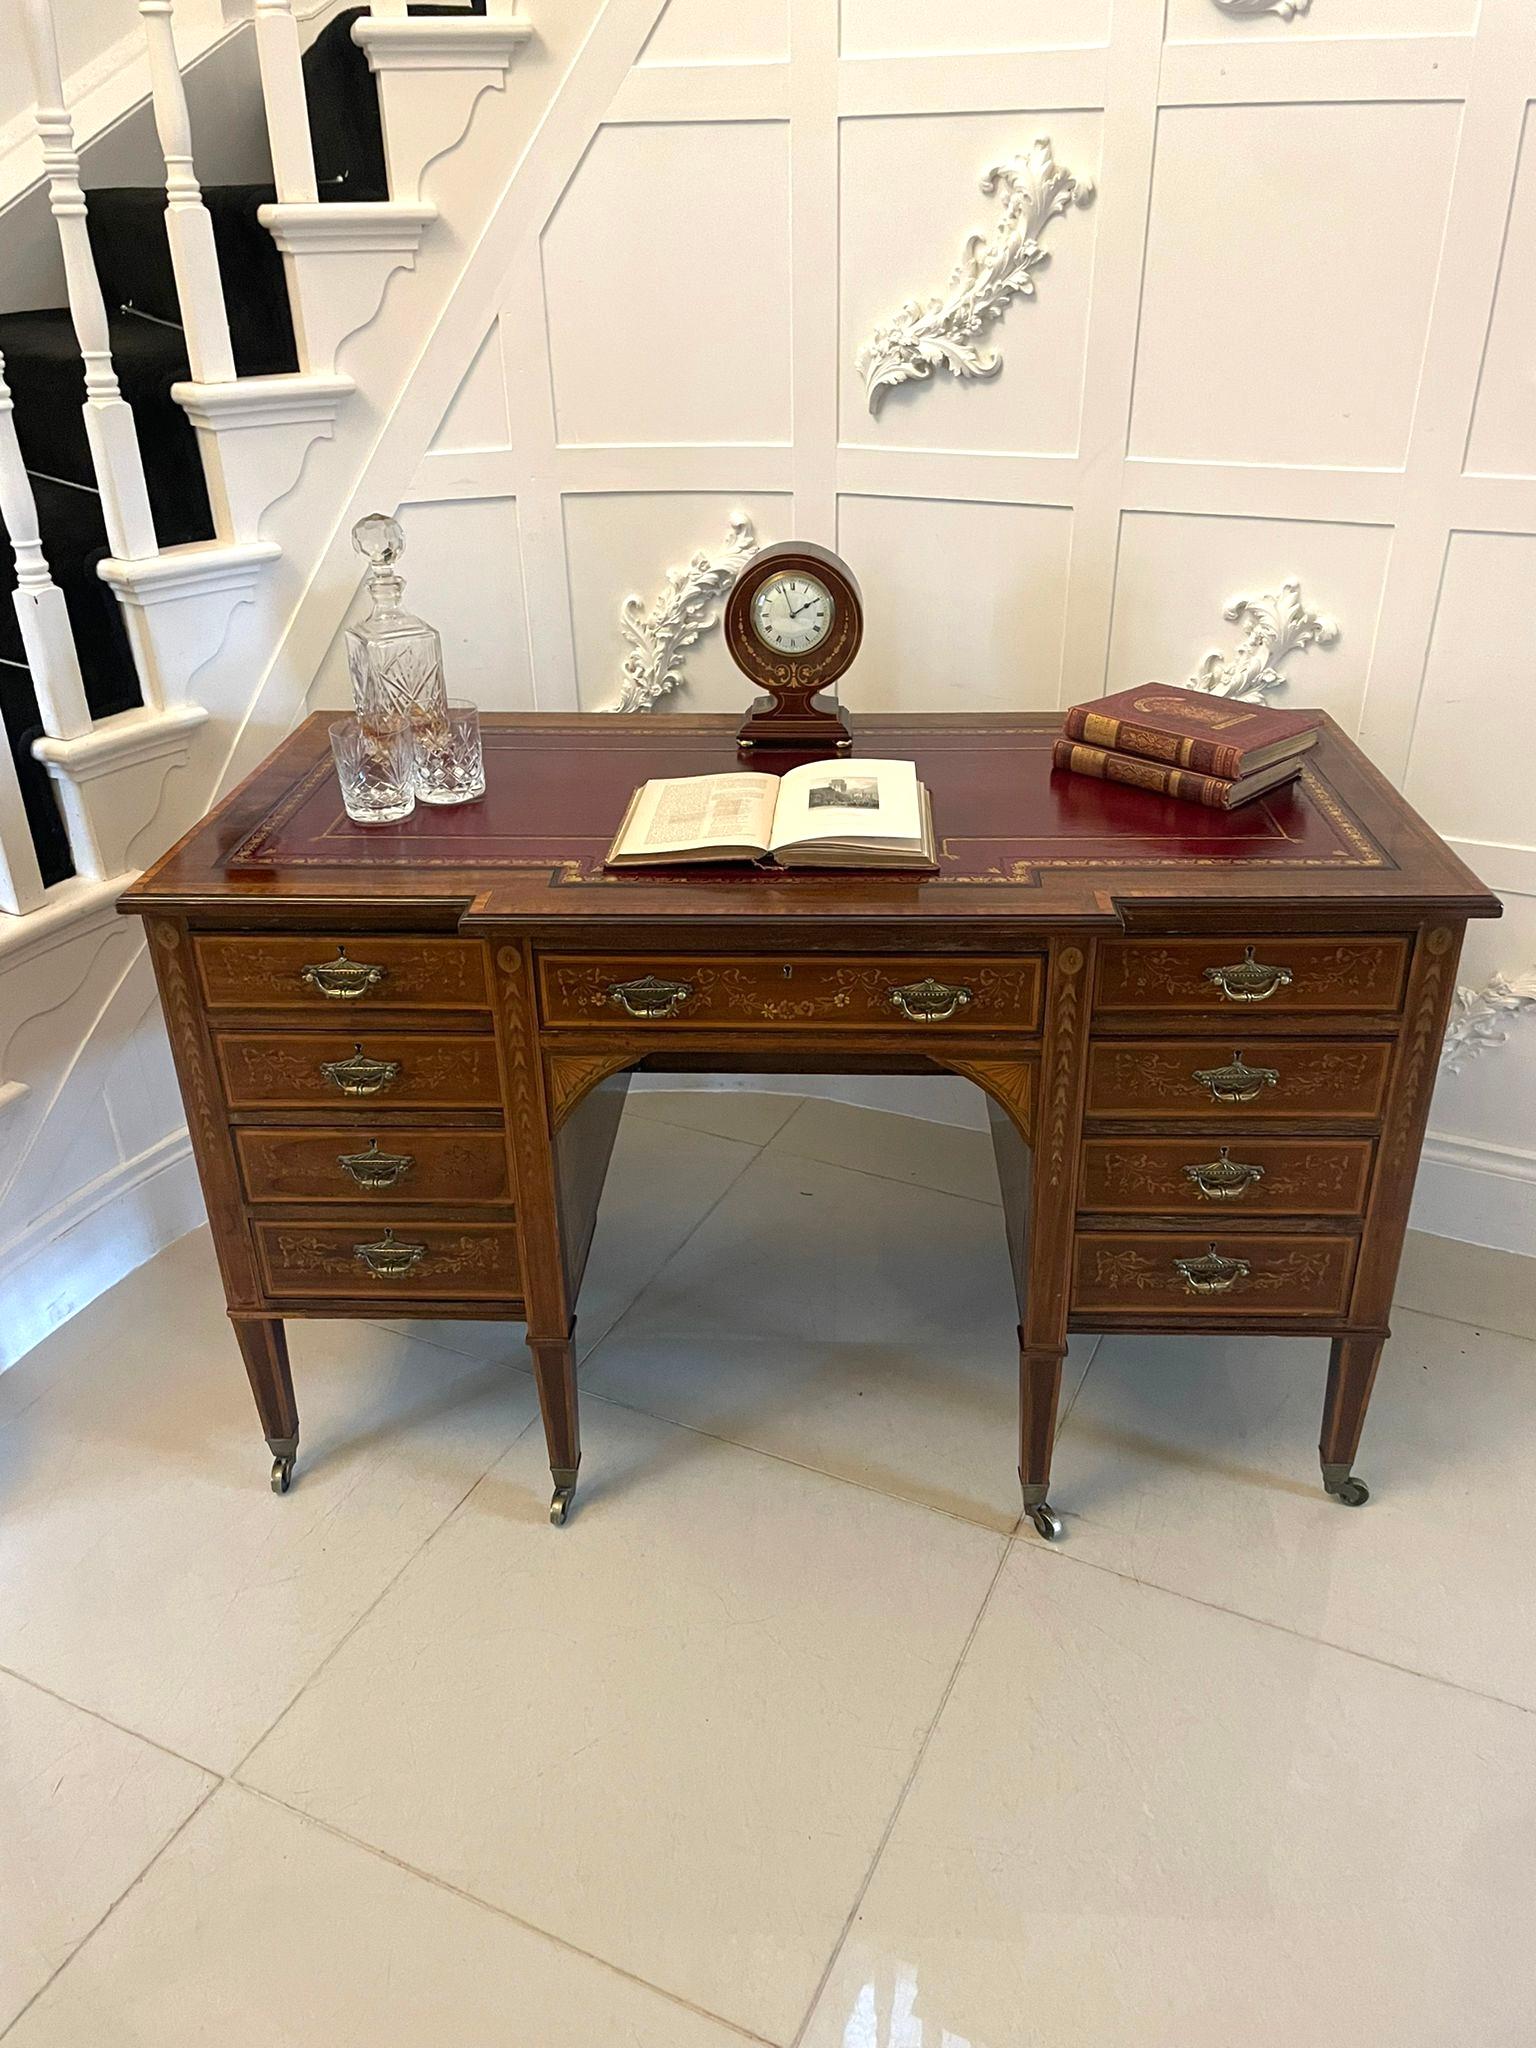 Outstanding quality antique Victorian mahogany inlaid kneehole desk by Edwards and Roberts having a quality mahogany breakfront shaped top crossbanded in satinwood with a red leather writing surface above nine drawers with outstanding quality